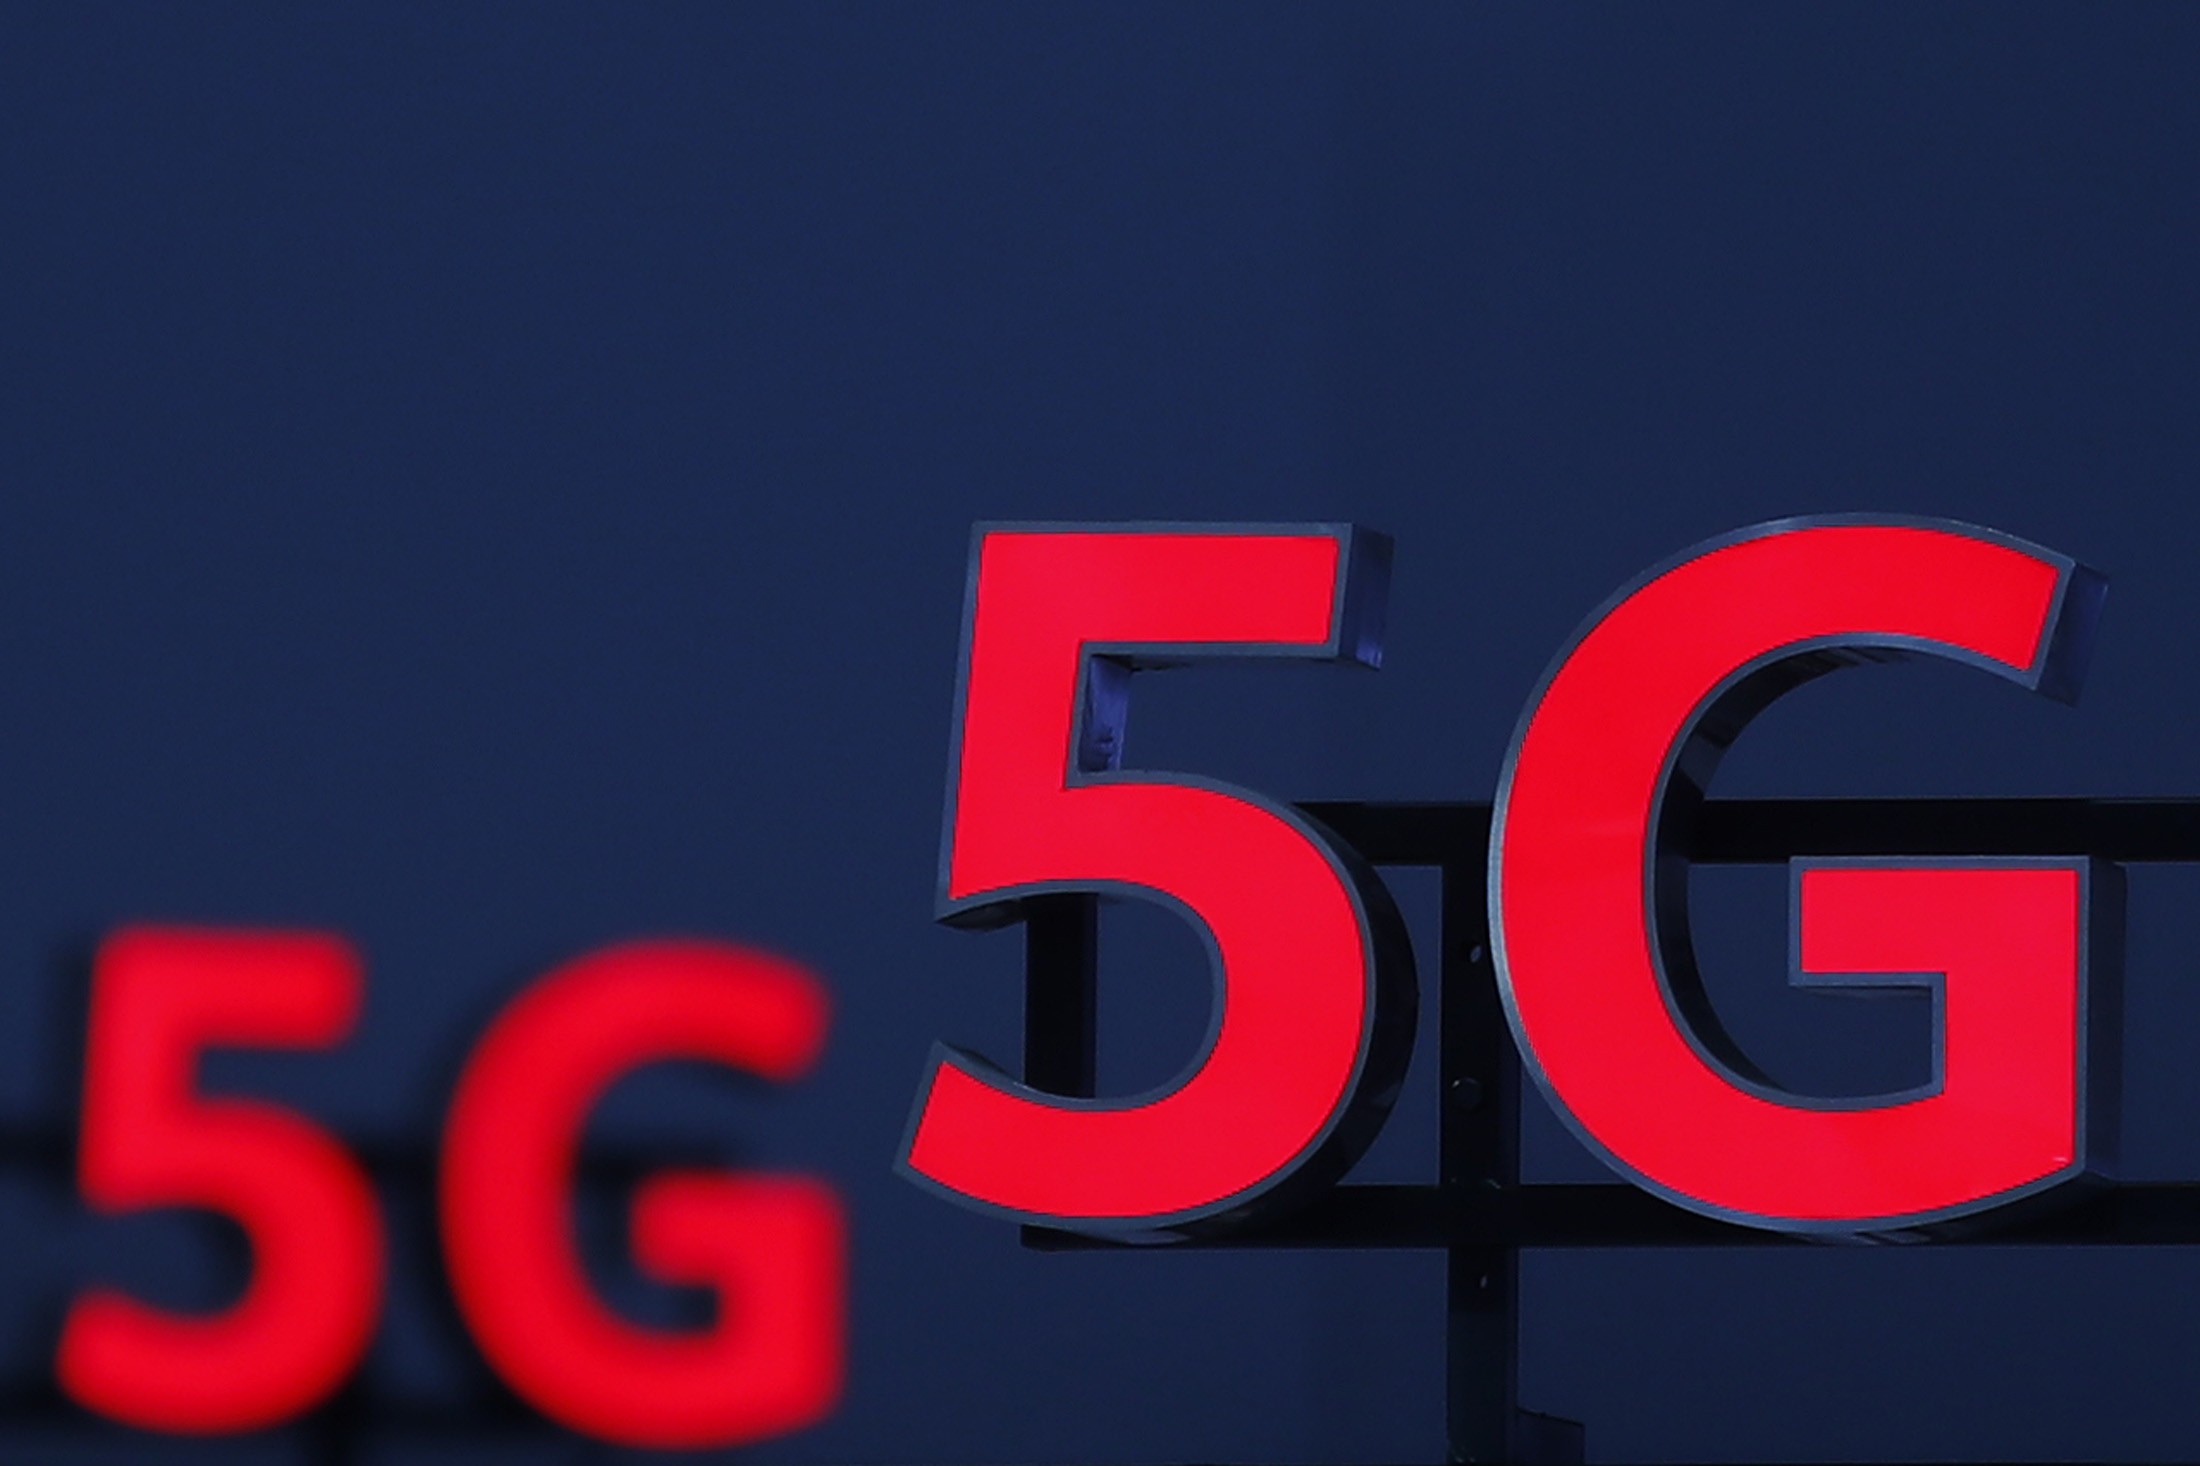 The US struggle with China to dominate 5G telecoms networks threatens the roll-out of the technology, panellists at a conference in New York said Tuesday. Photo: AFP